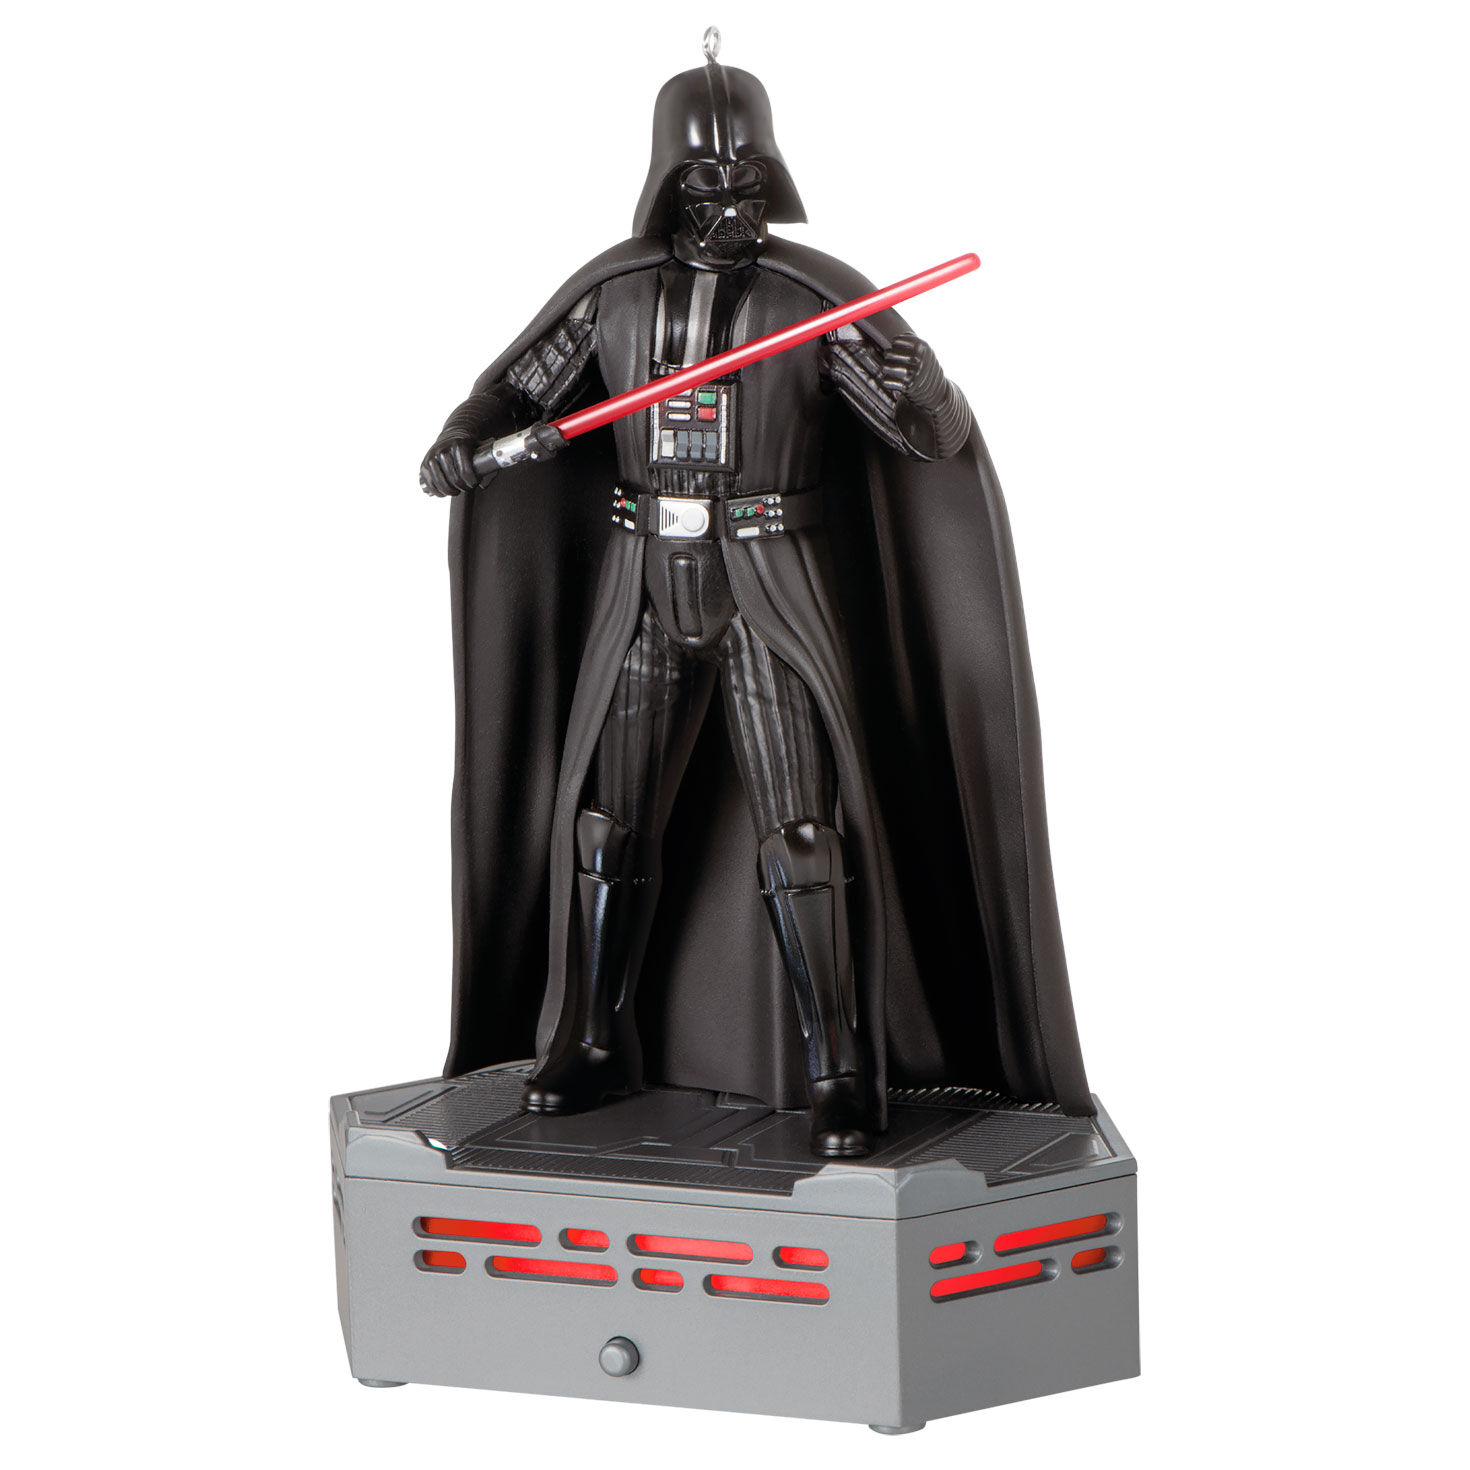 Star Wars: A New Hope™ Collection Darth Vader™ Ornament With Light and Sound for only USD 29.99 | Hallmark